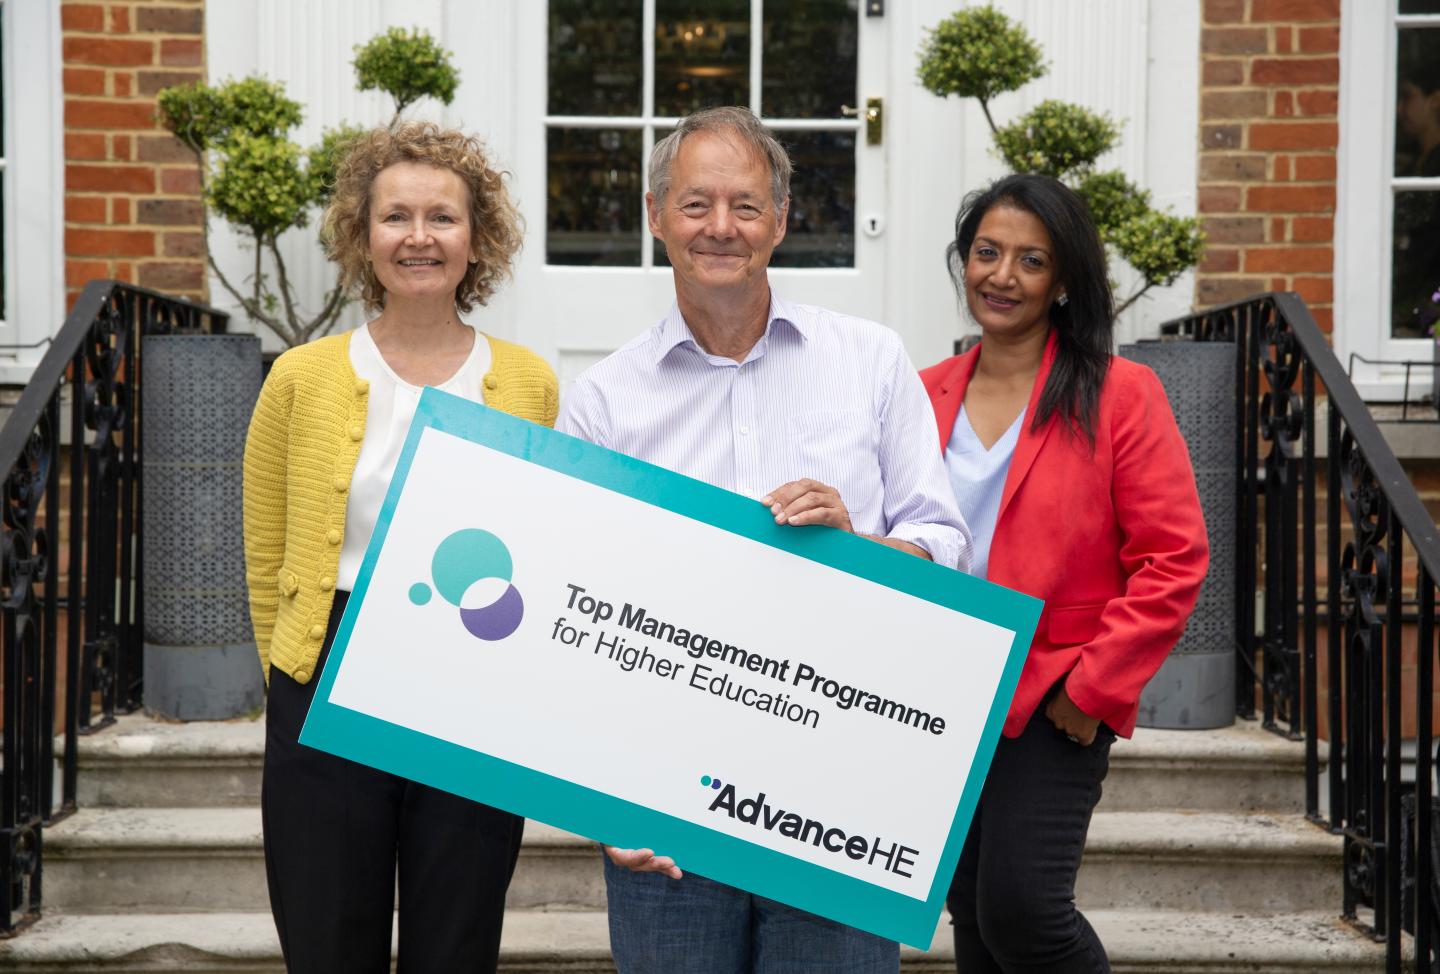 Two women and a man with a sign which says 'Top Management Programme'